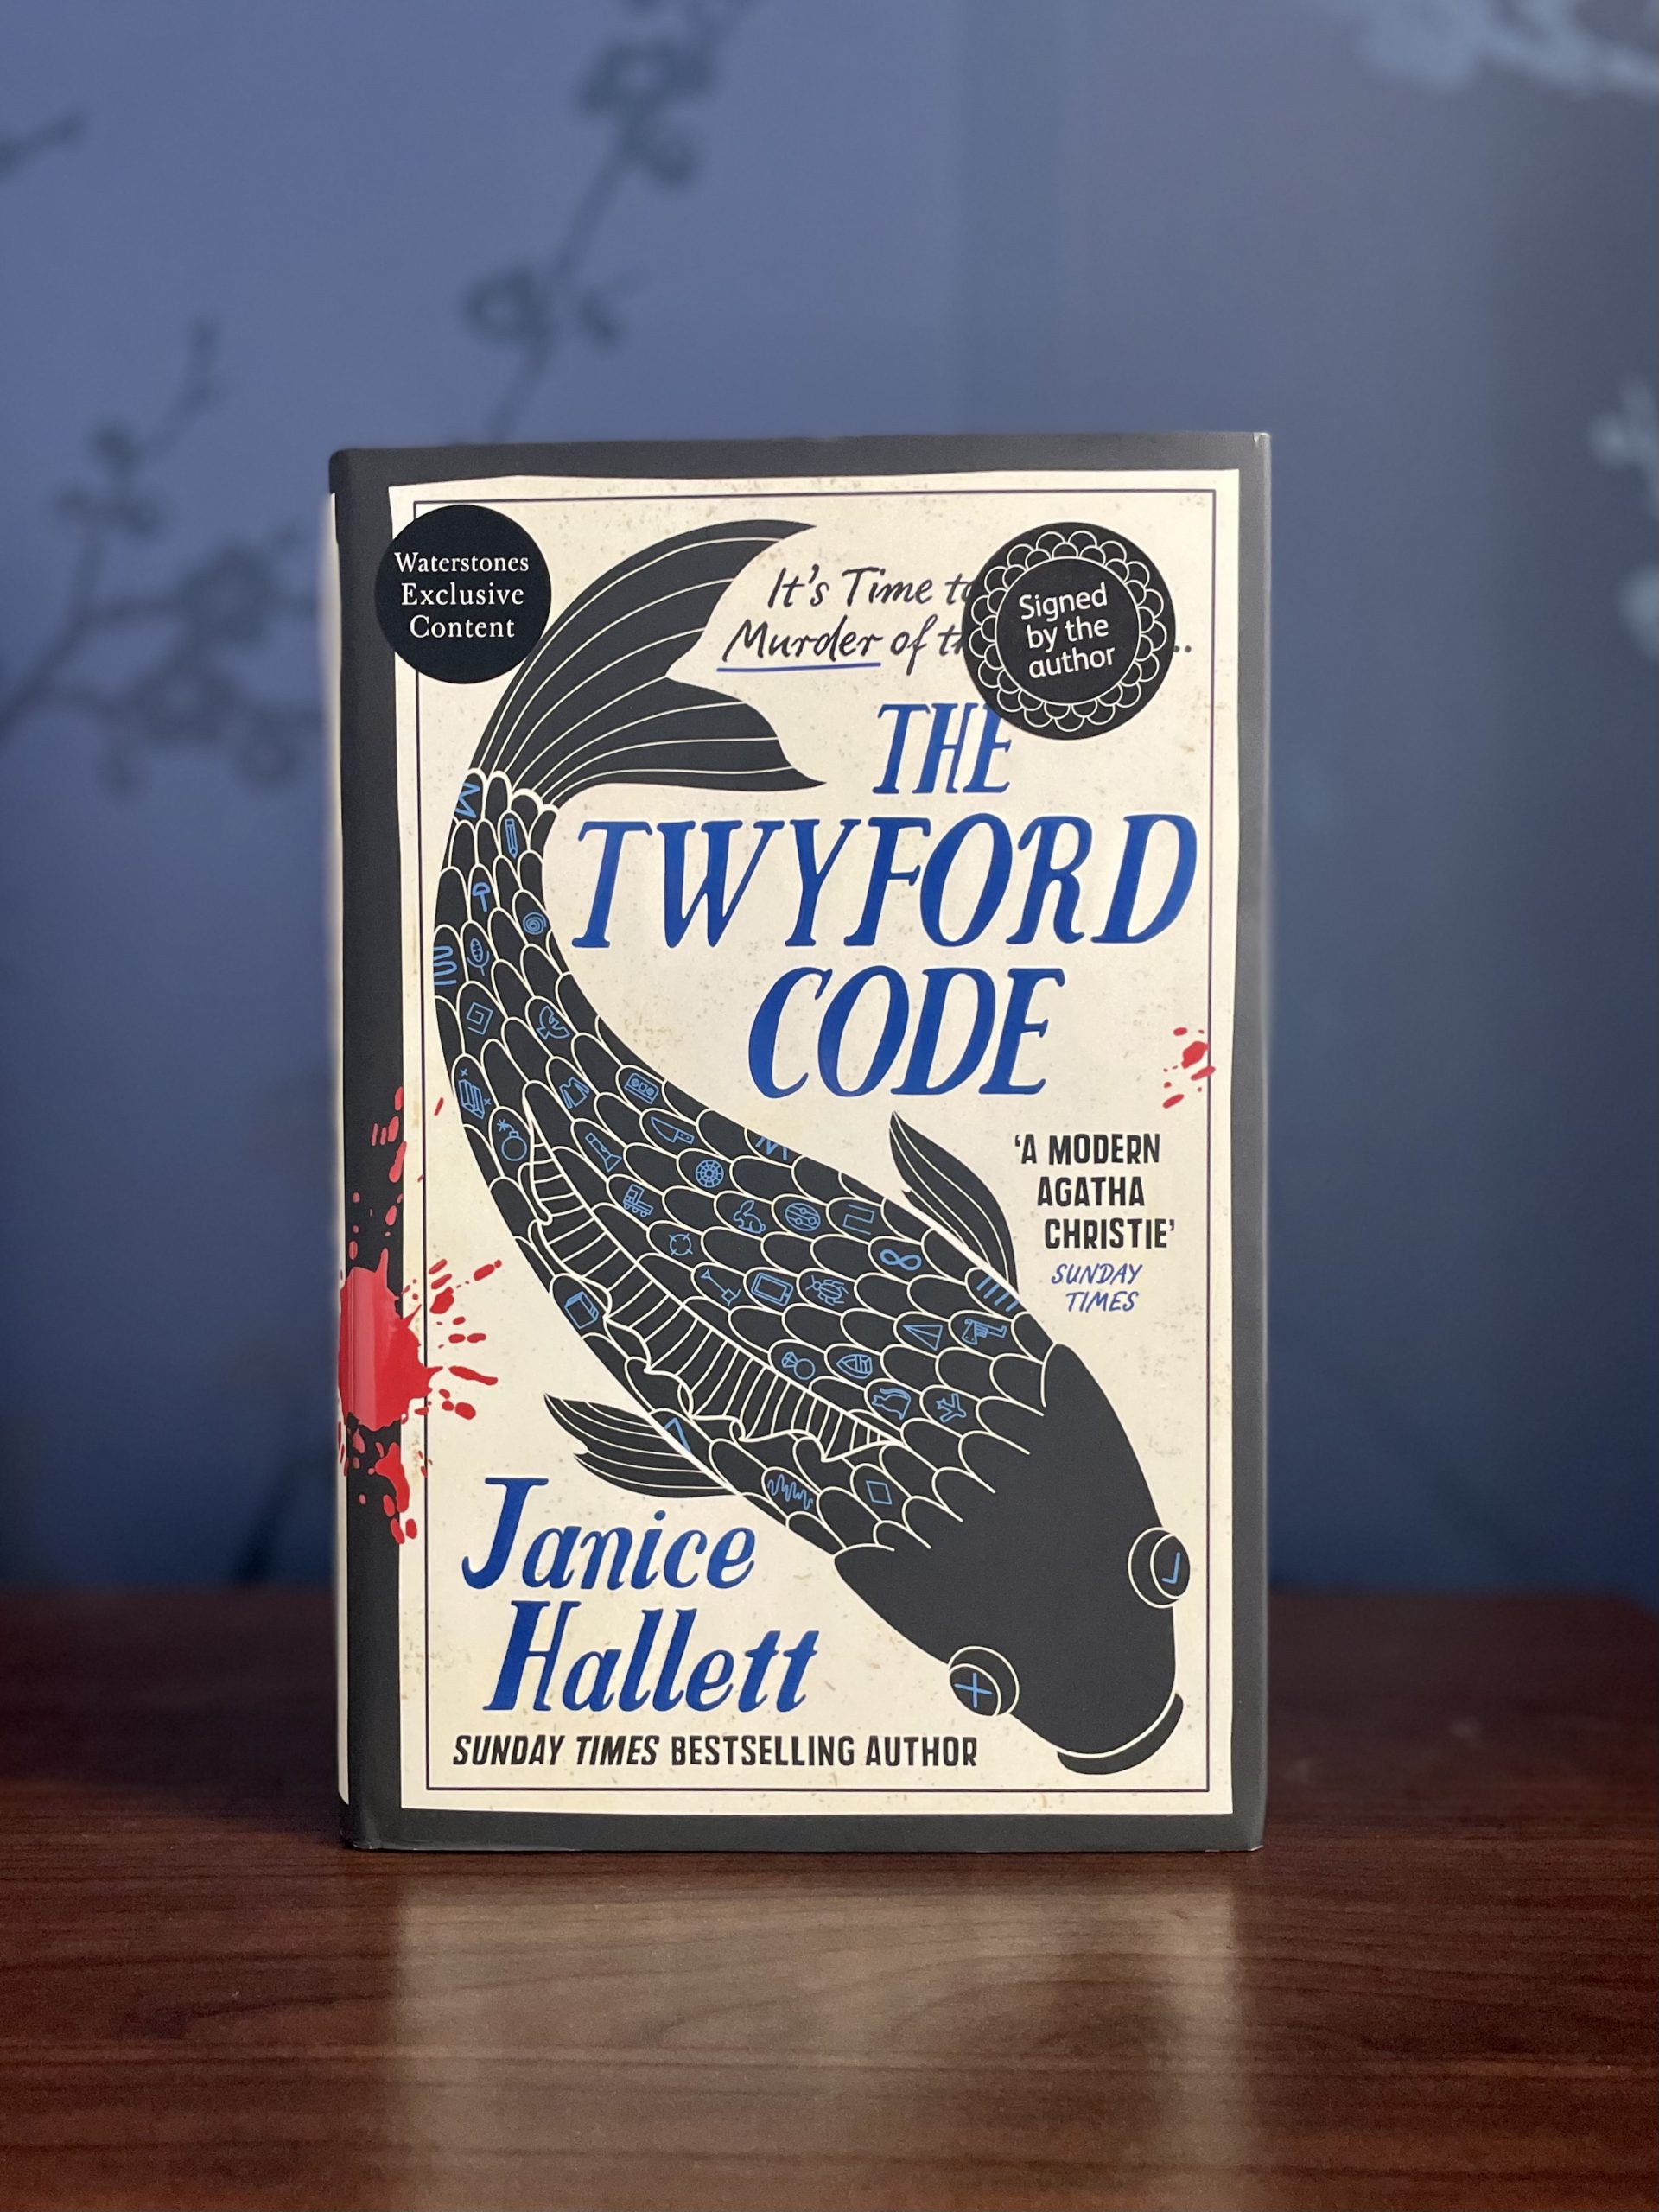 The Twyford Code: How to re-read a twist ending